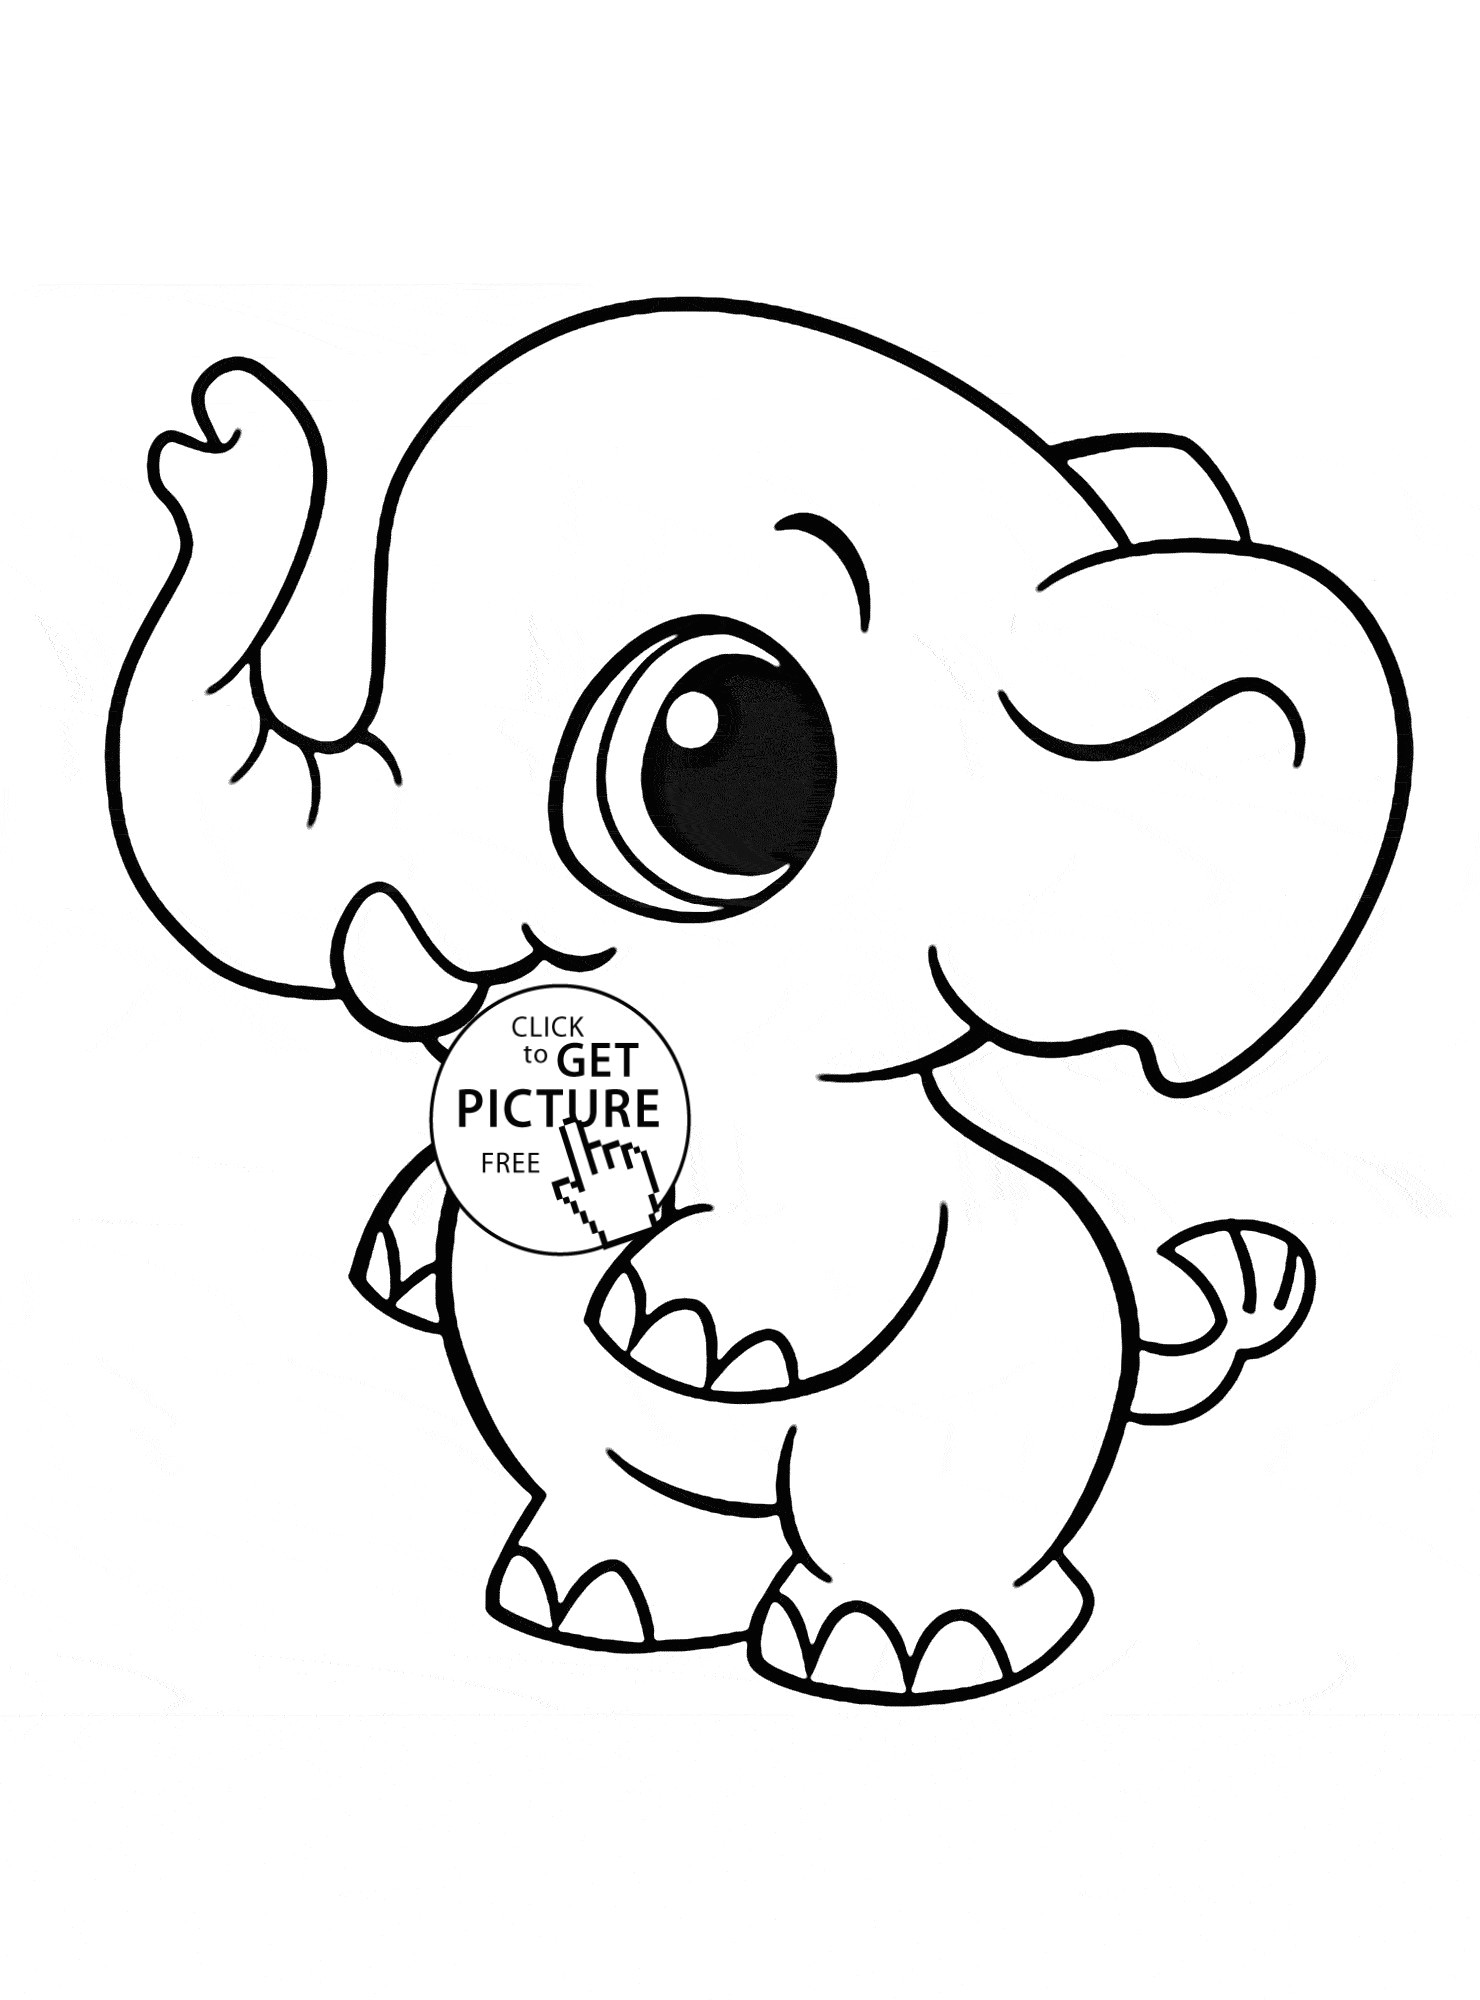 Elephant Pictures Easy to Draw New Elephant Cartoon Coloring Hivideoshow Info